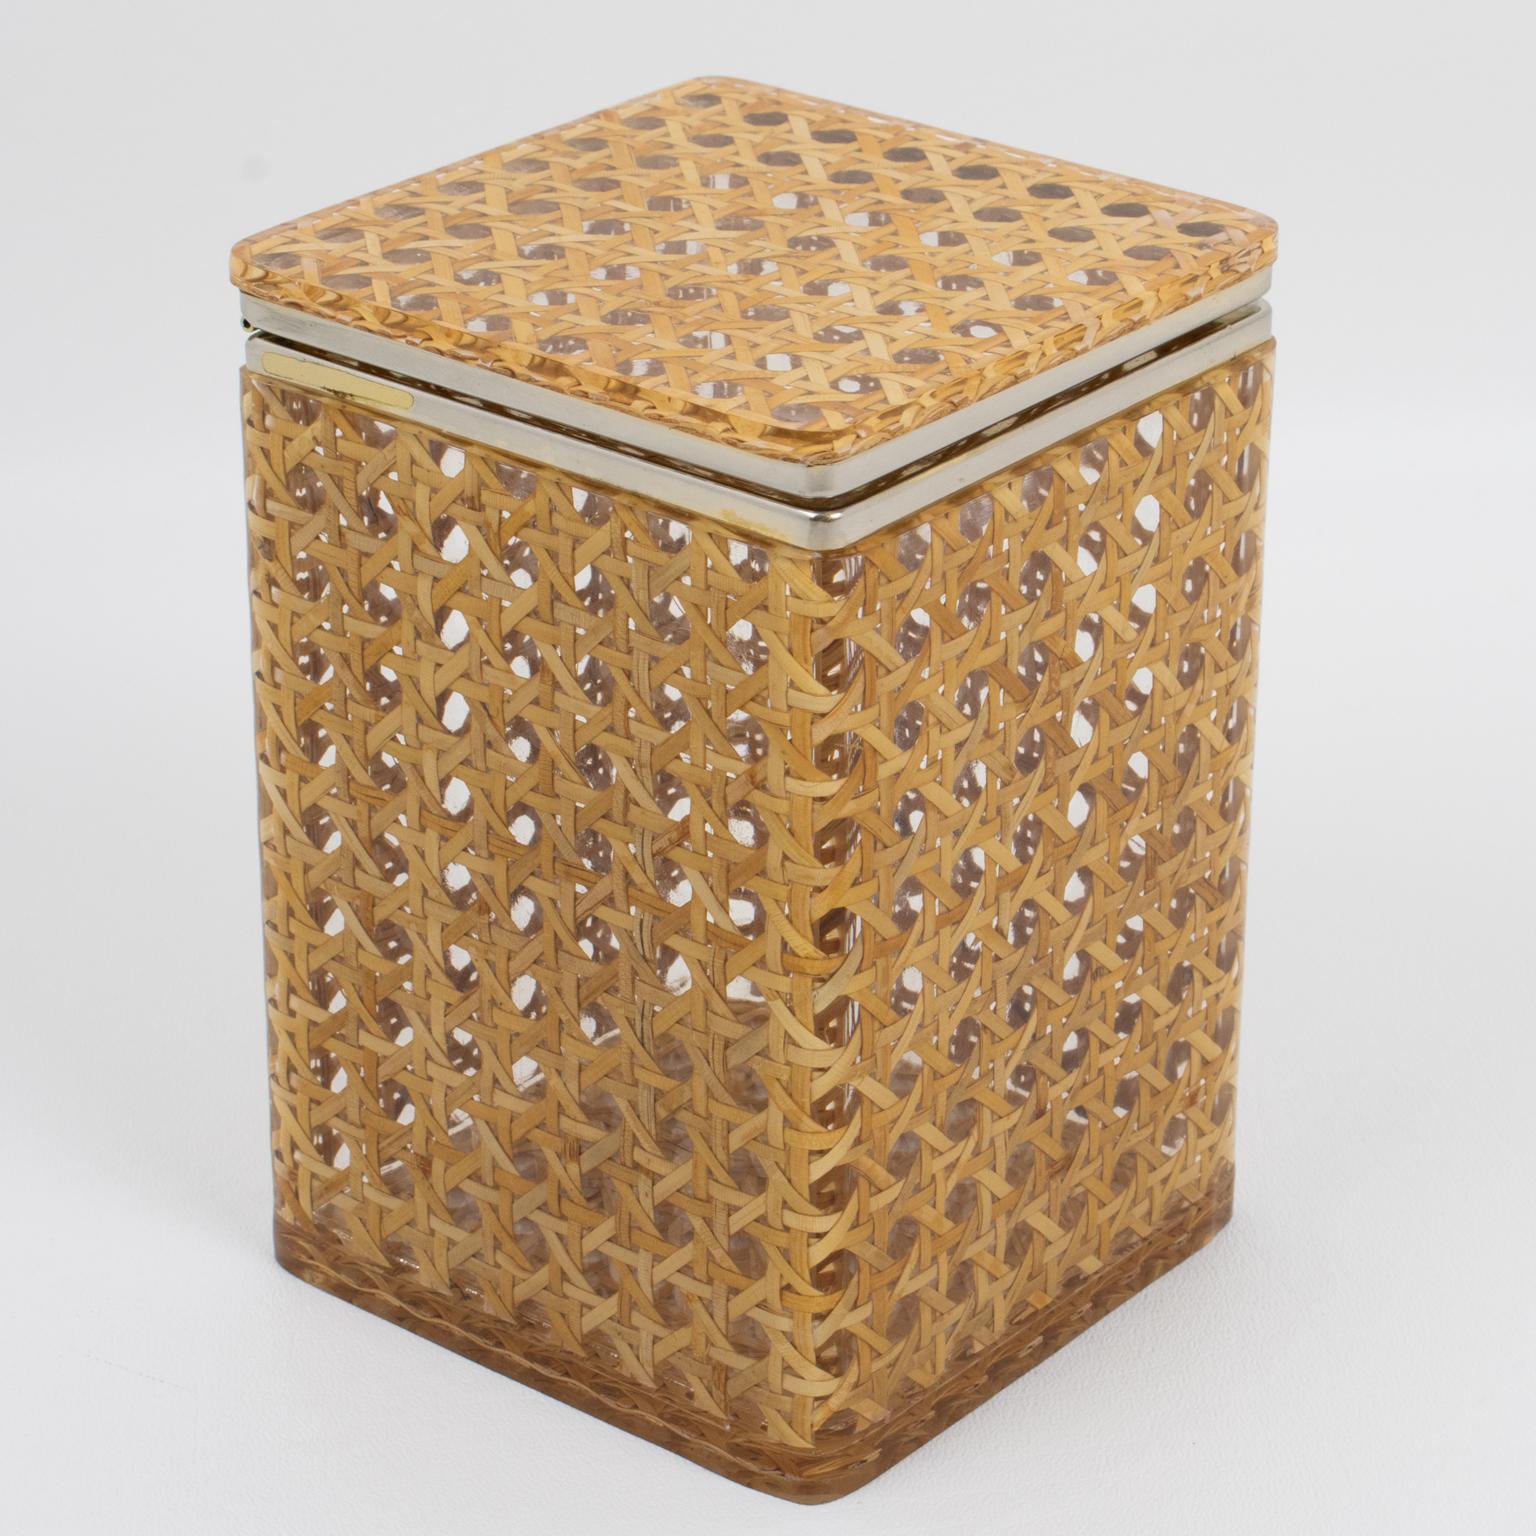 This gorgeous decorative tall box is perfect for a living space or vanity. The chrome-plated framing is complemented with clear Lucite and rattan or wicker cane work. The rattan is embedded within two thick sheets of clear Lucite or acrylic material